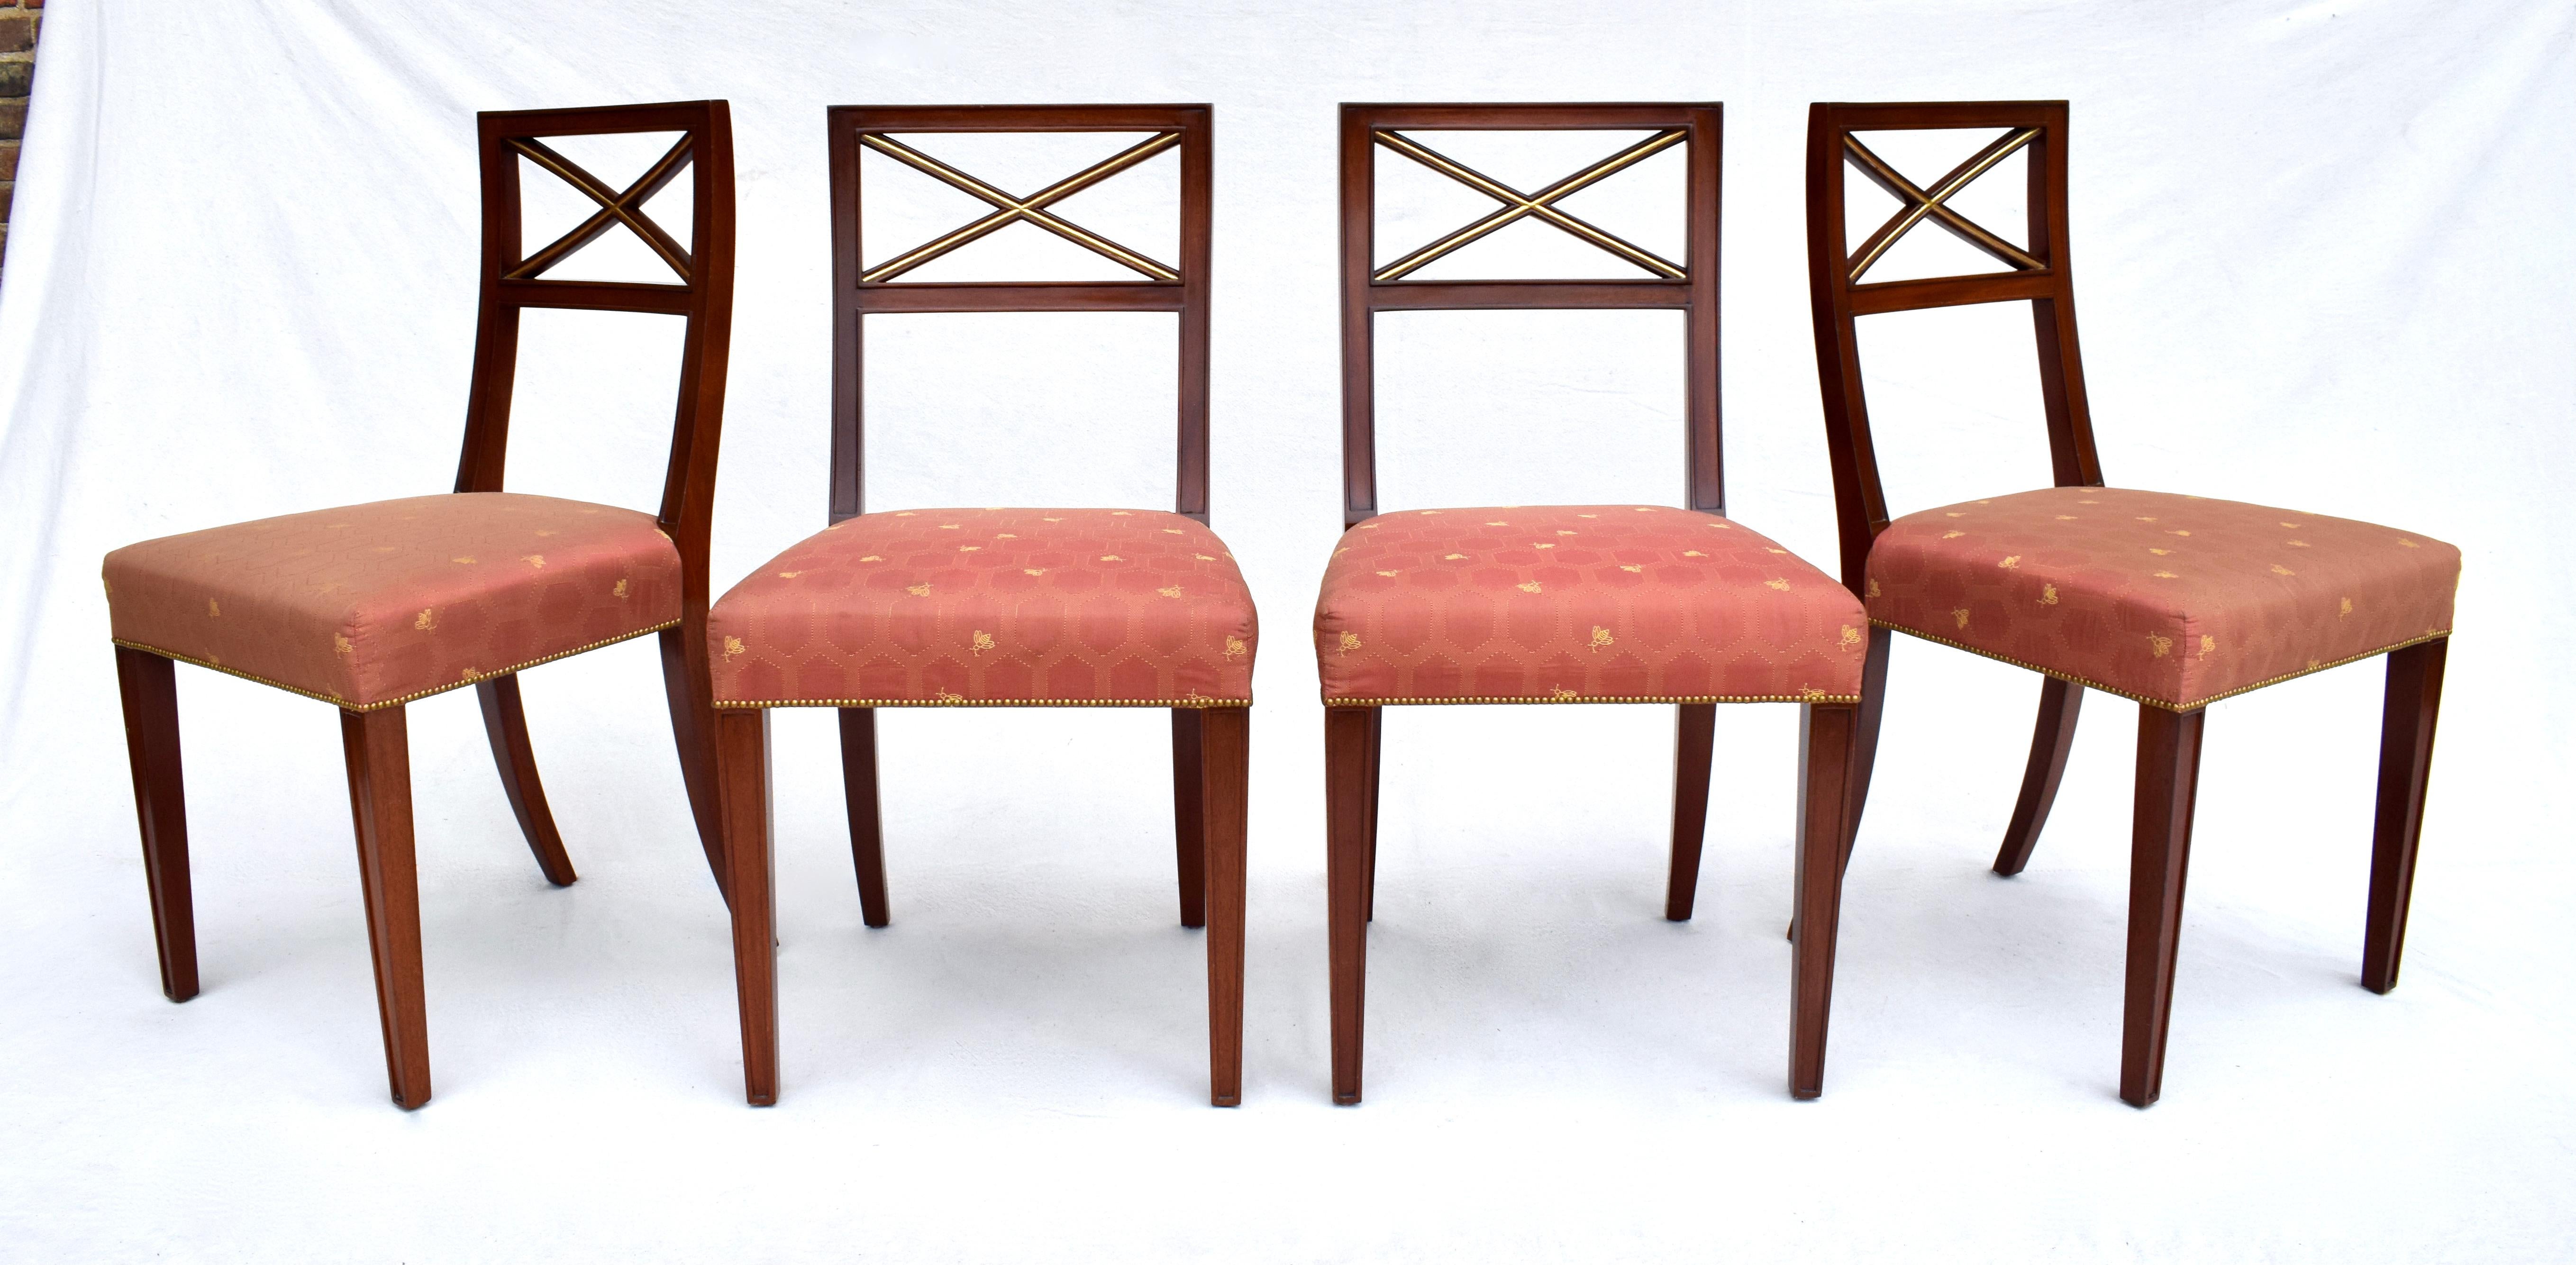 20th Century Regency x Back Dining Chairs in the Manner of Thomas Pheasant for Baker For Sale